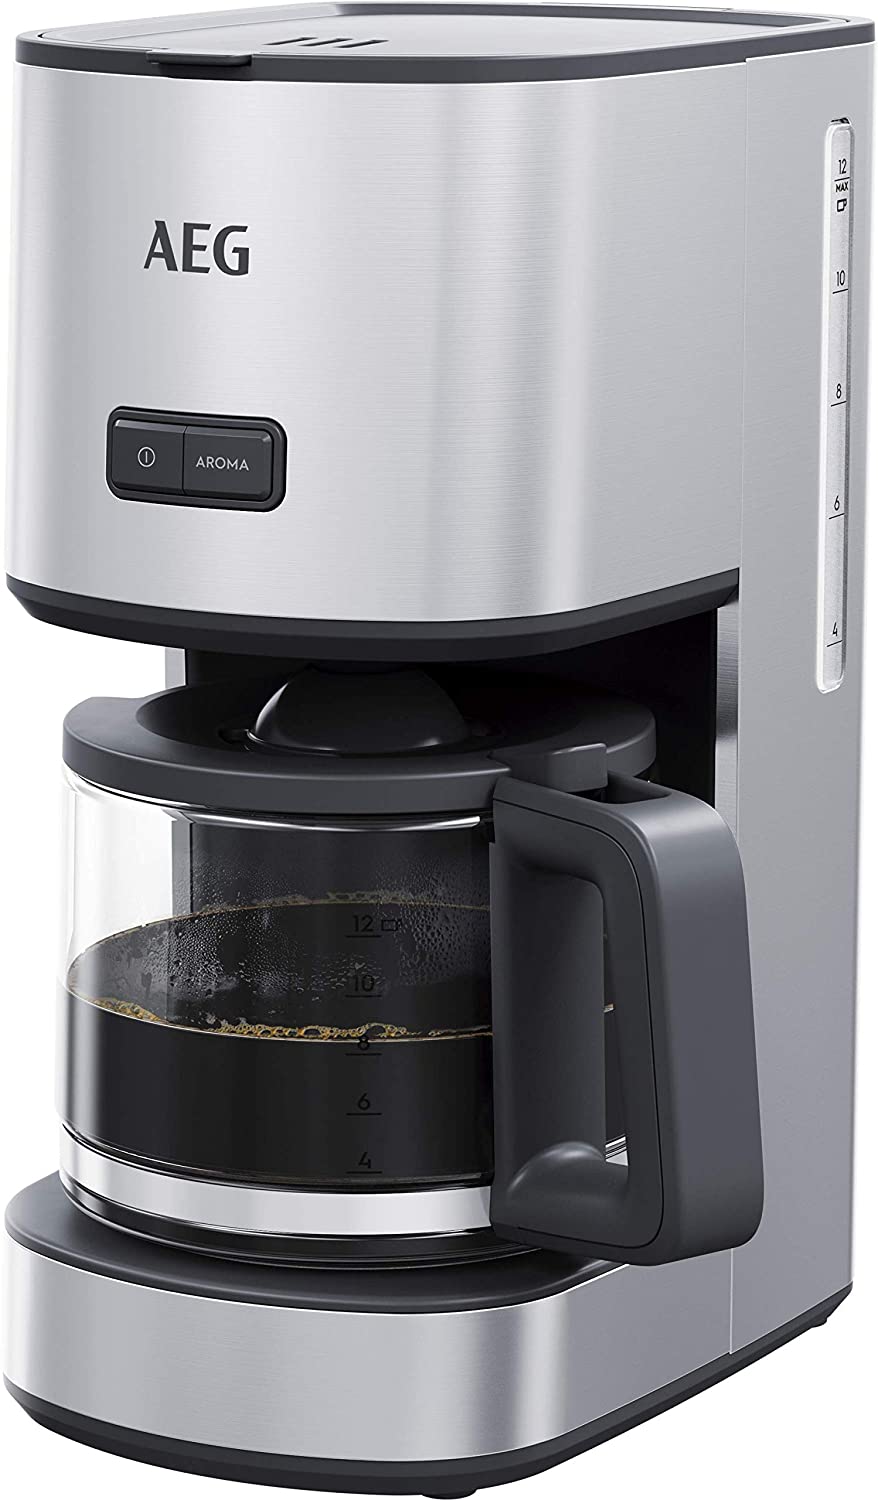 AEG CM4-1-4ST Coffee Machine / 1.5 L Glass Jug / 12 Cups / Keep Warm Function / Flavour Selectable / Anti-drip Valve / Removable Filter Basket / Safety Shut Off / Brushed Stainless Steel